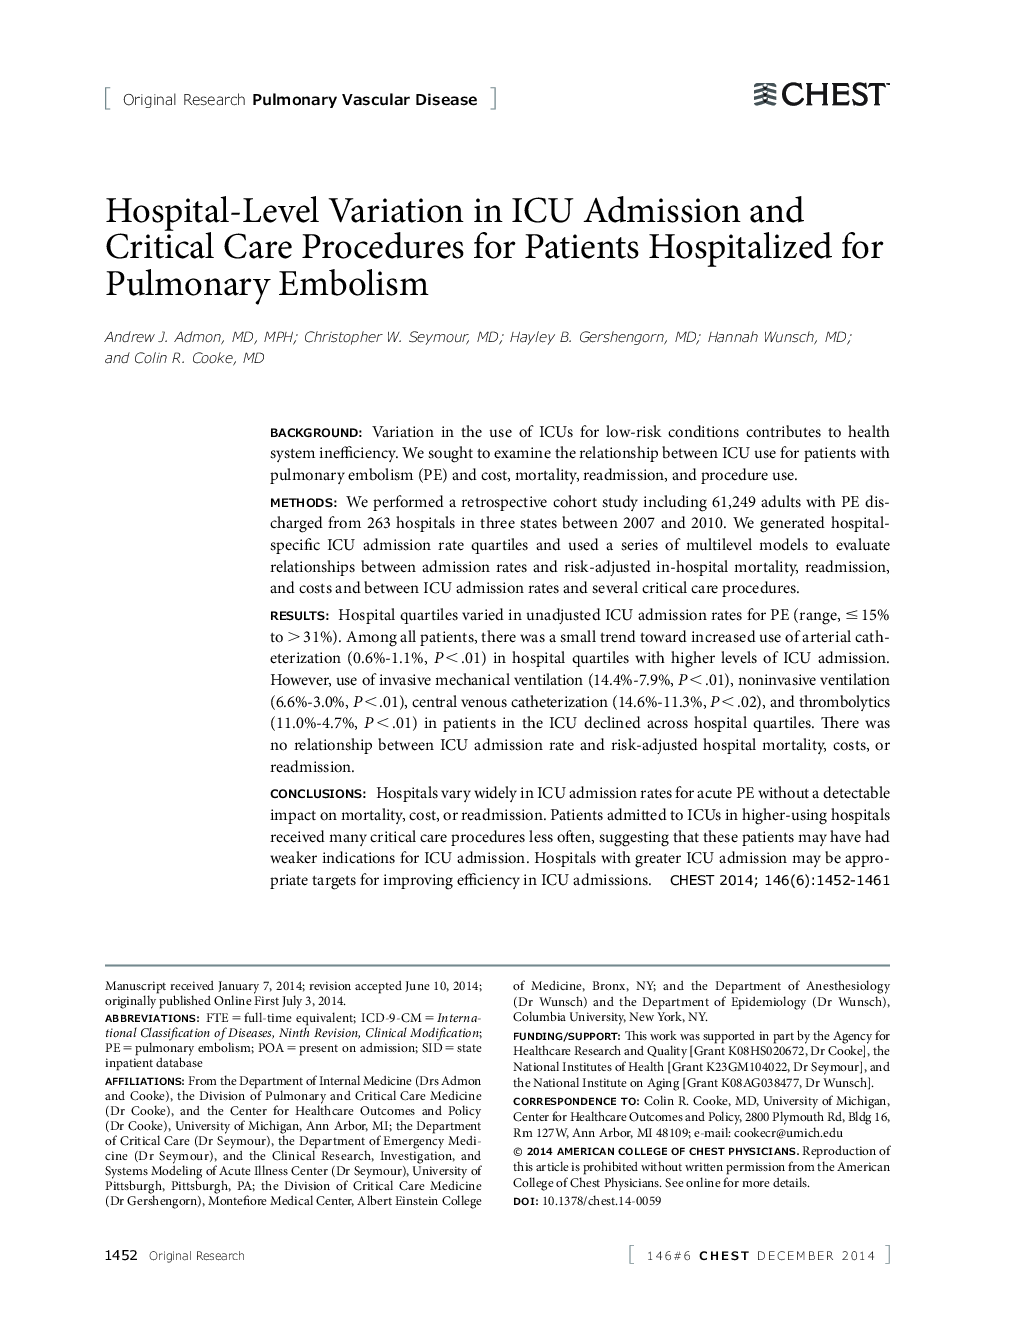 Hospital-Level Variation in ICU Admission and Critical Care Procedures for Patients Hospitalized for Pulmonary Embolism